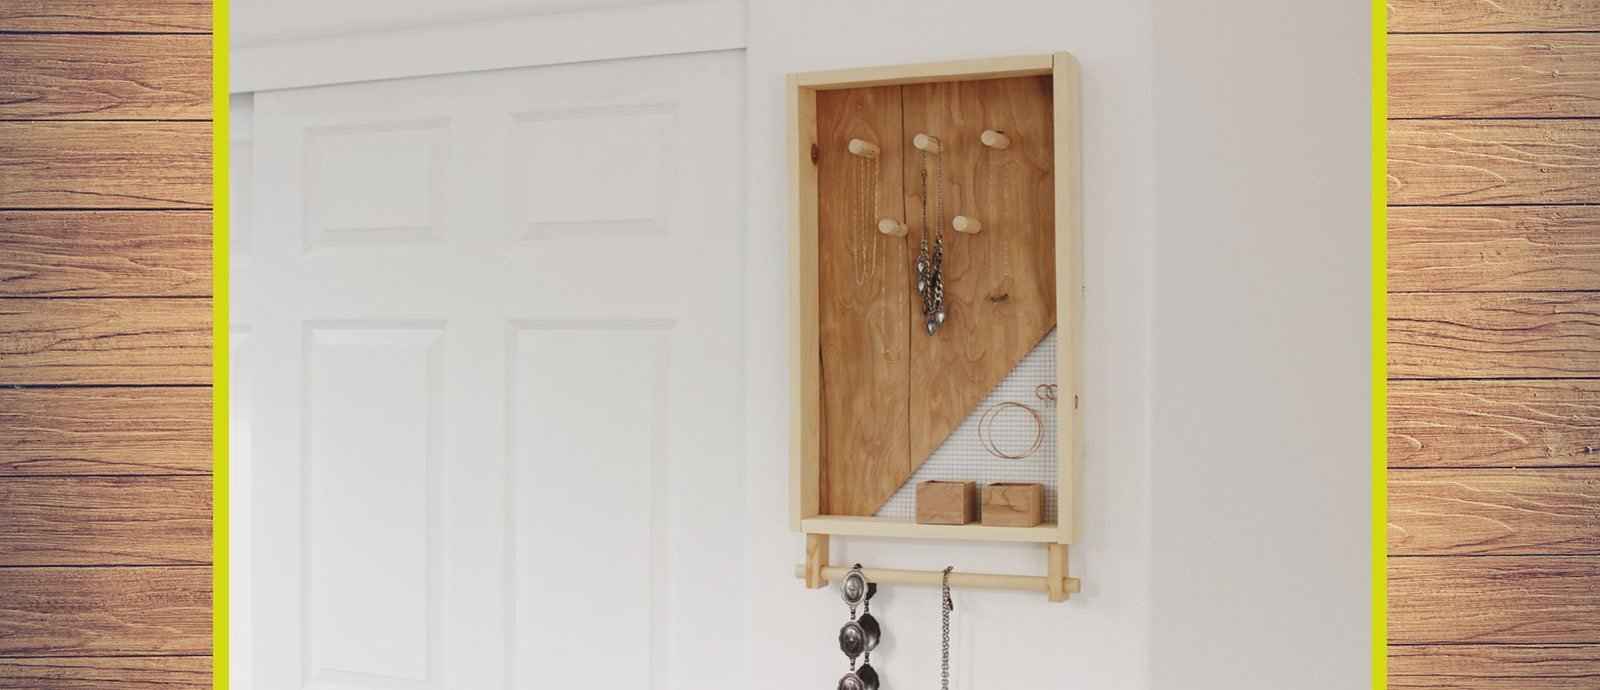 How to build a DIY Jewelry Holder